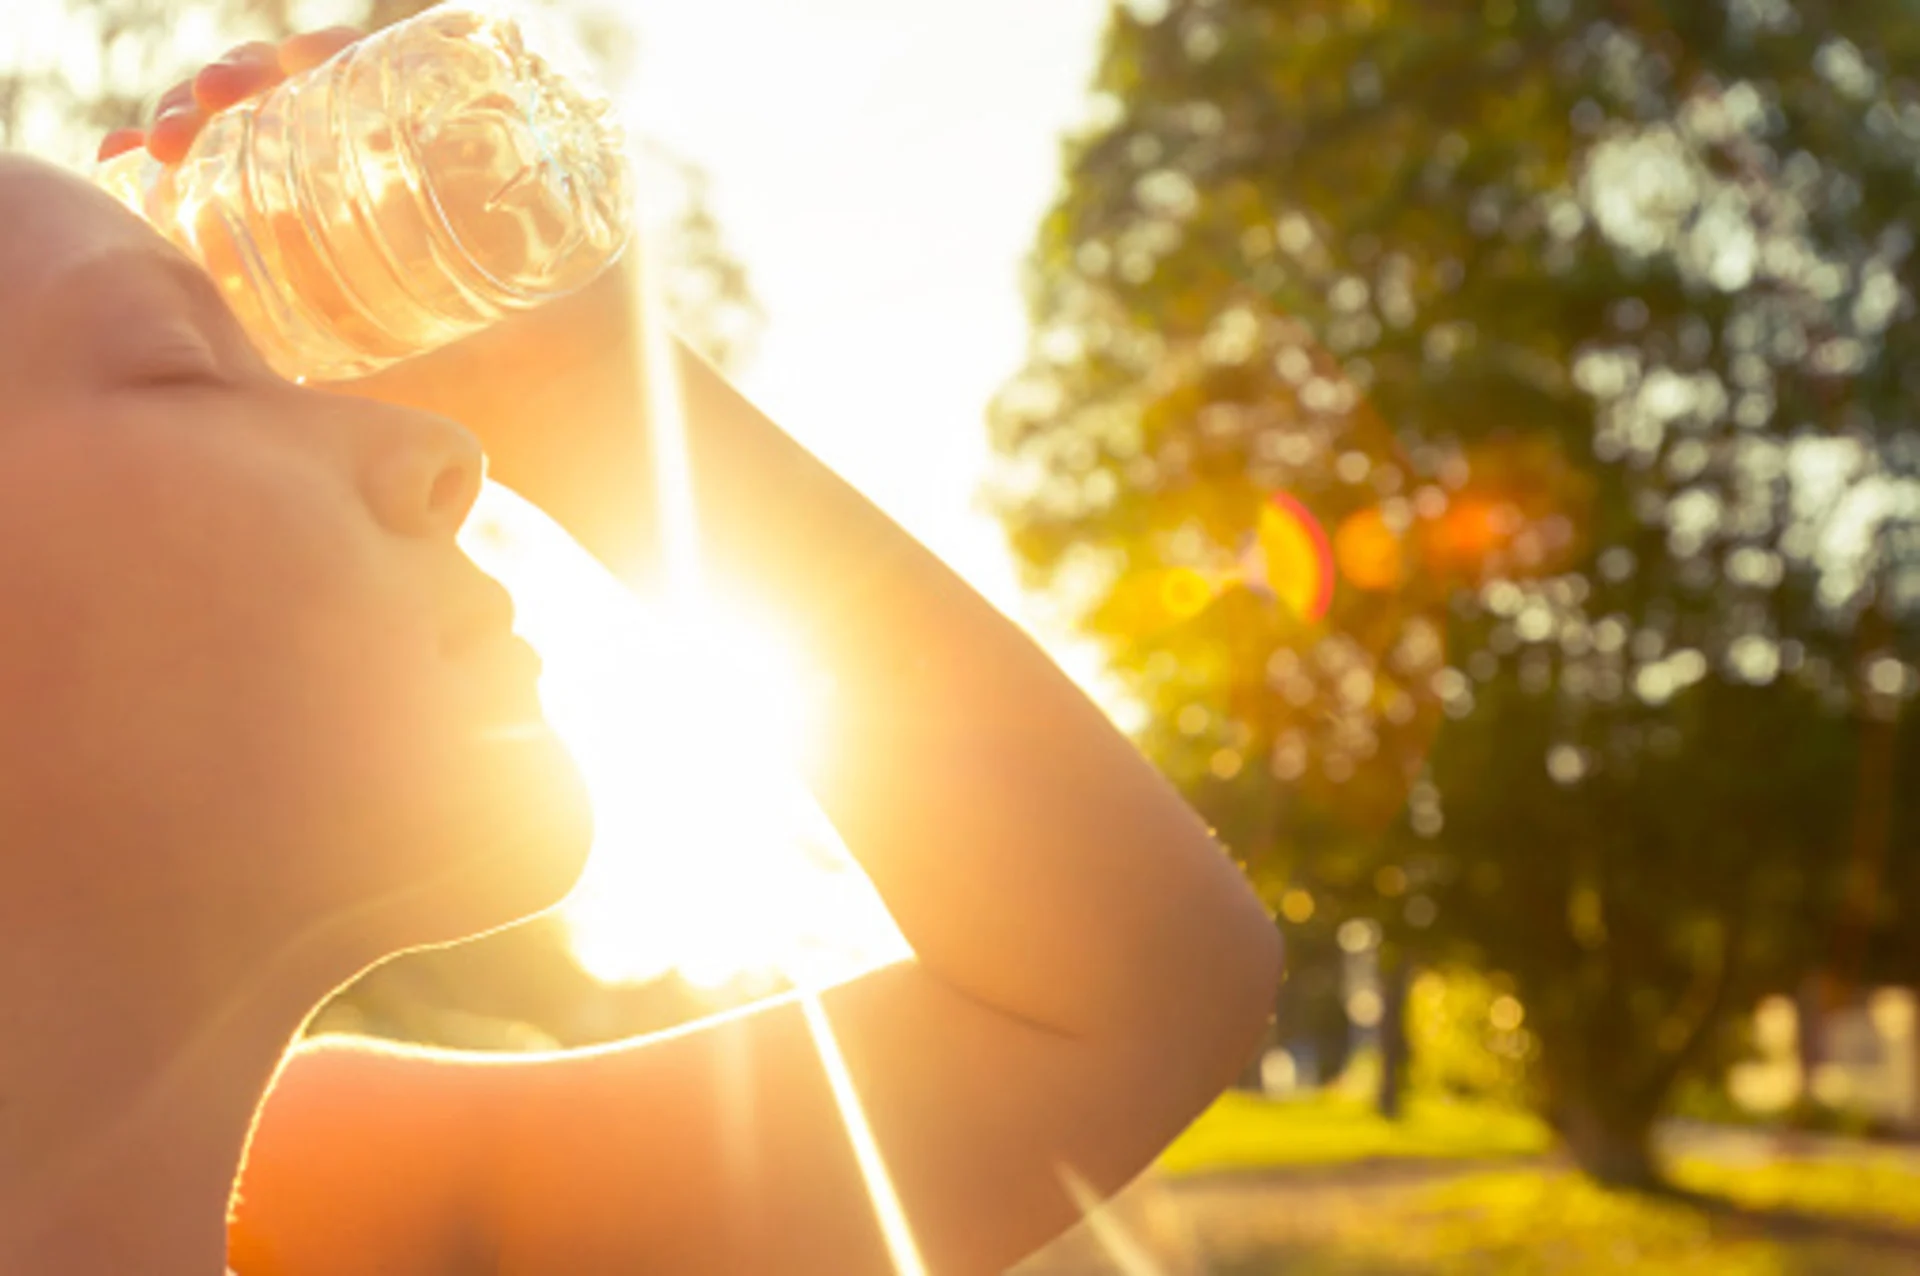 Dangerously hot temperatures take hold of Quebec this week, and there will be little reprieve overnight. What to know, here